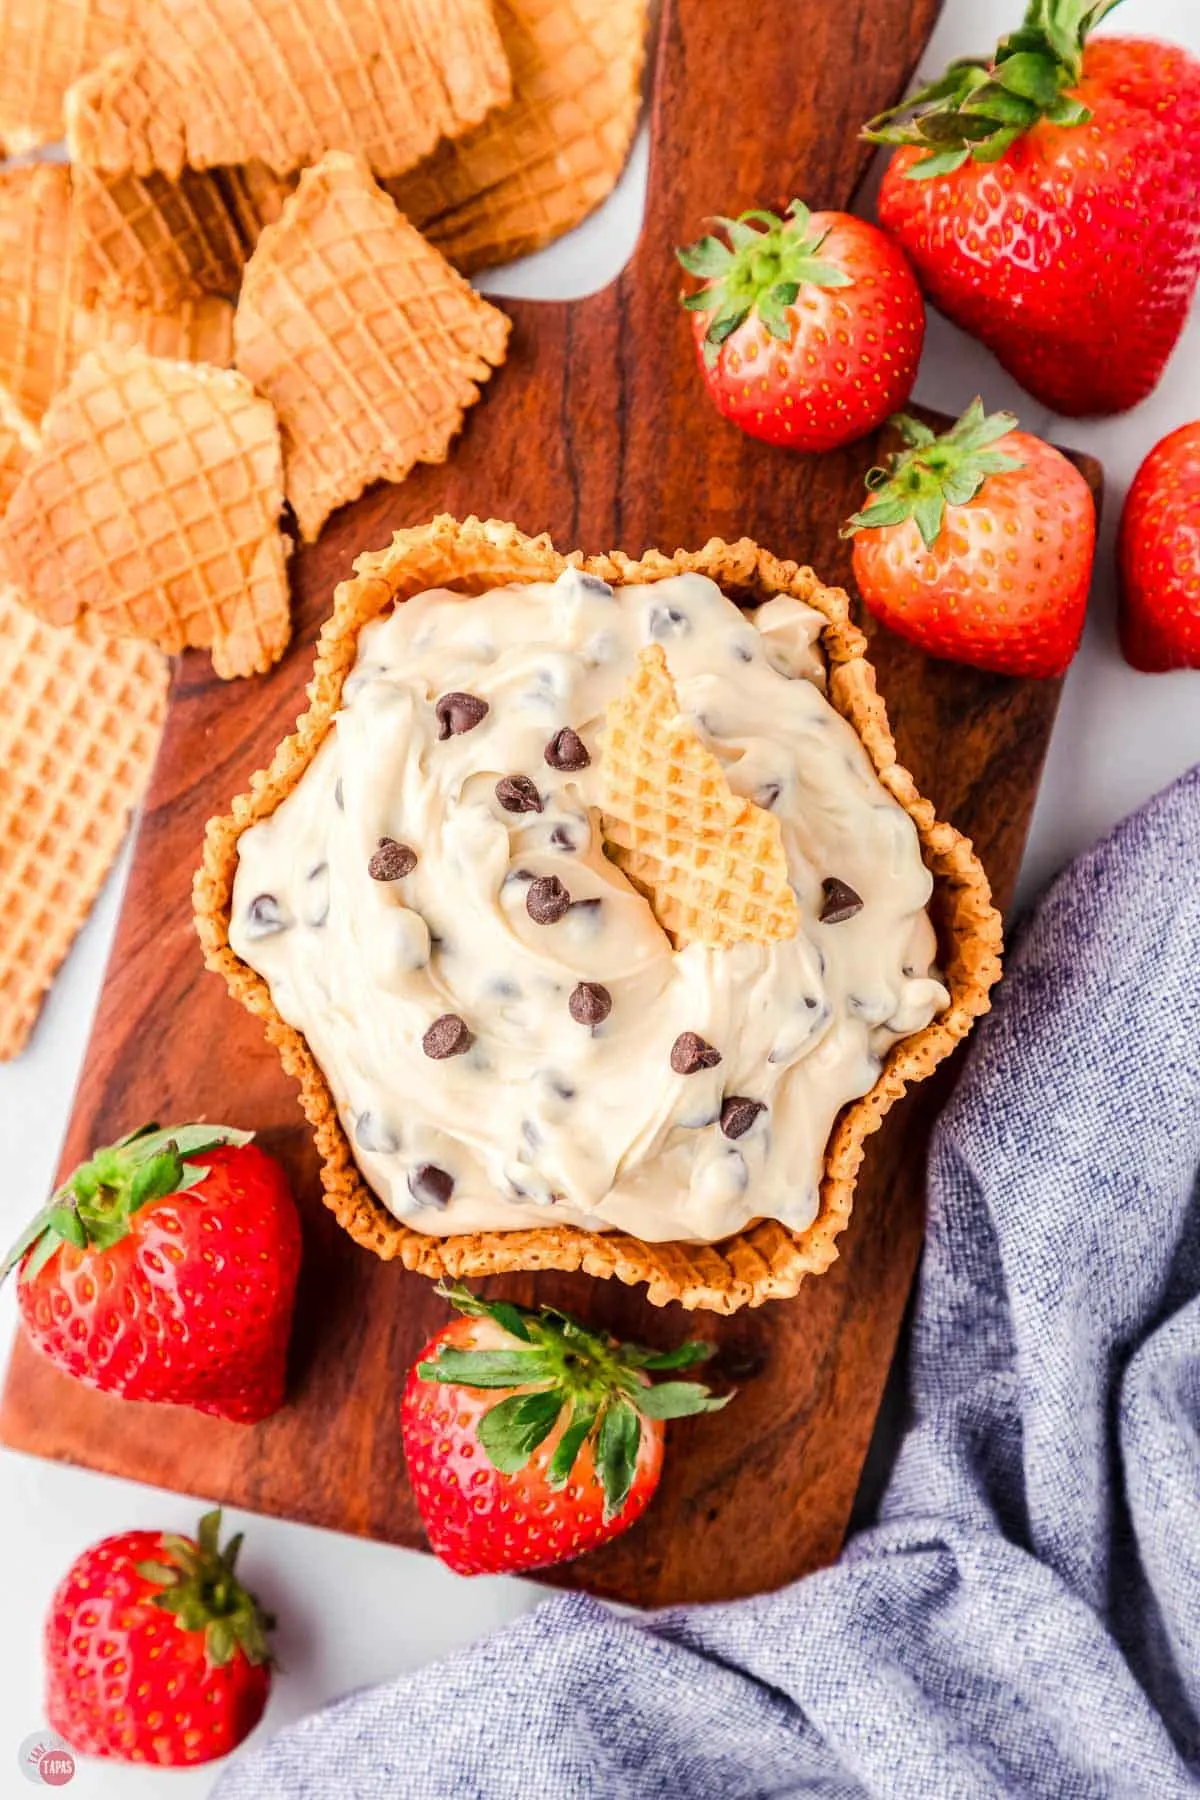 serve your favorite fruit with this delicious dip